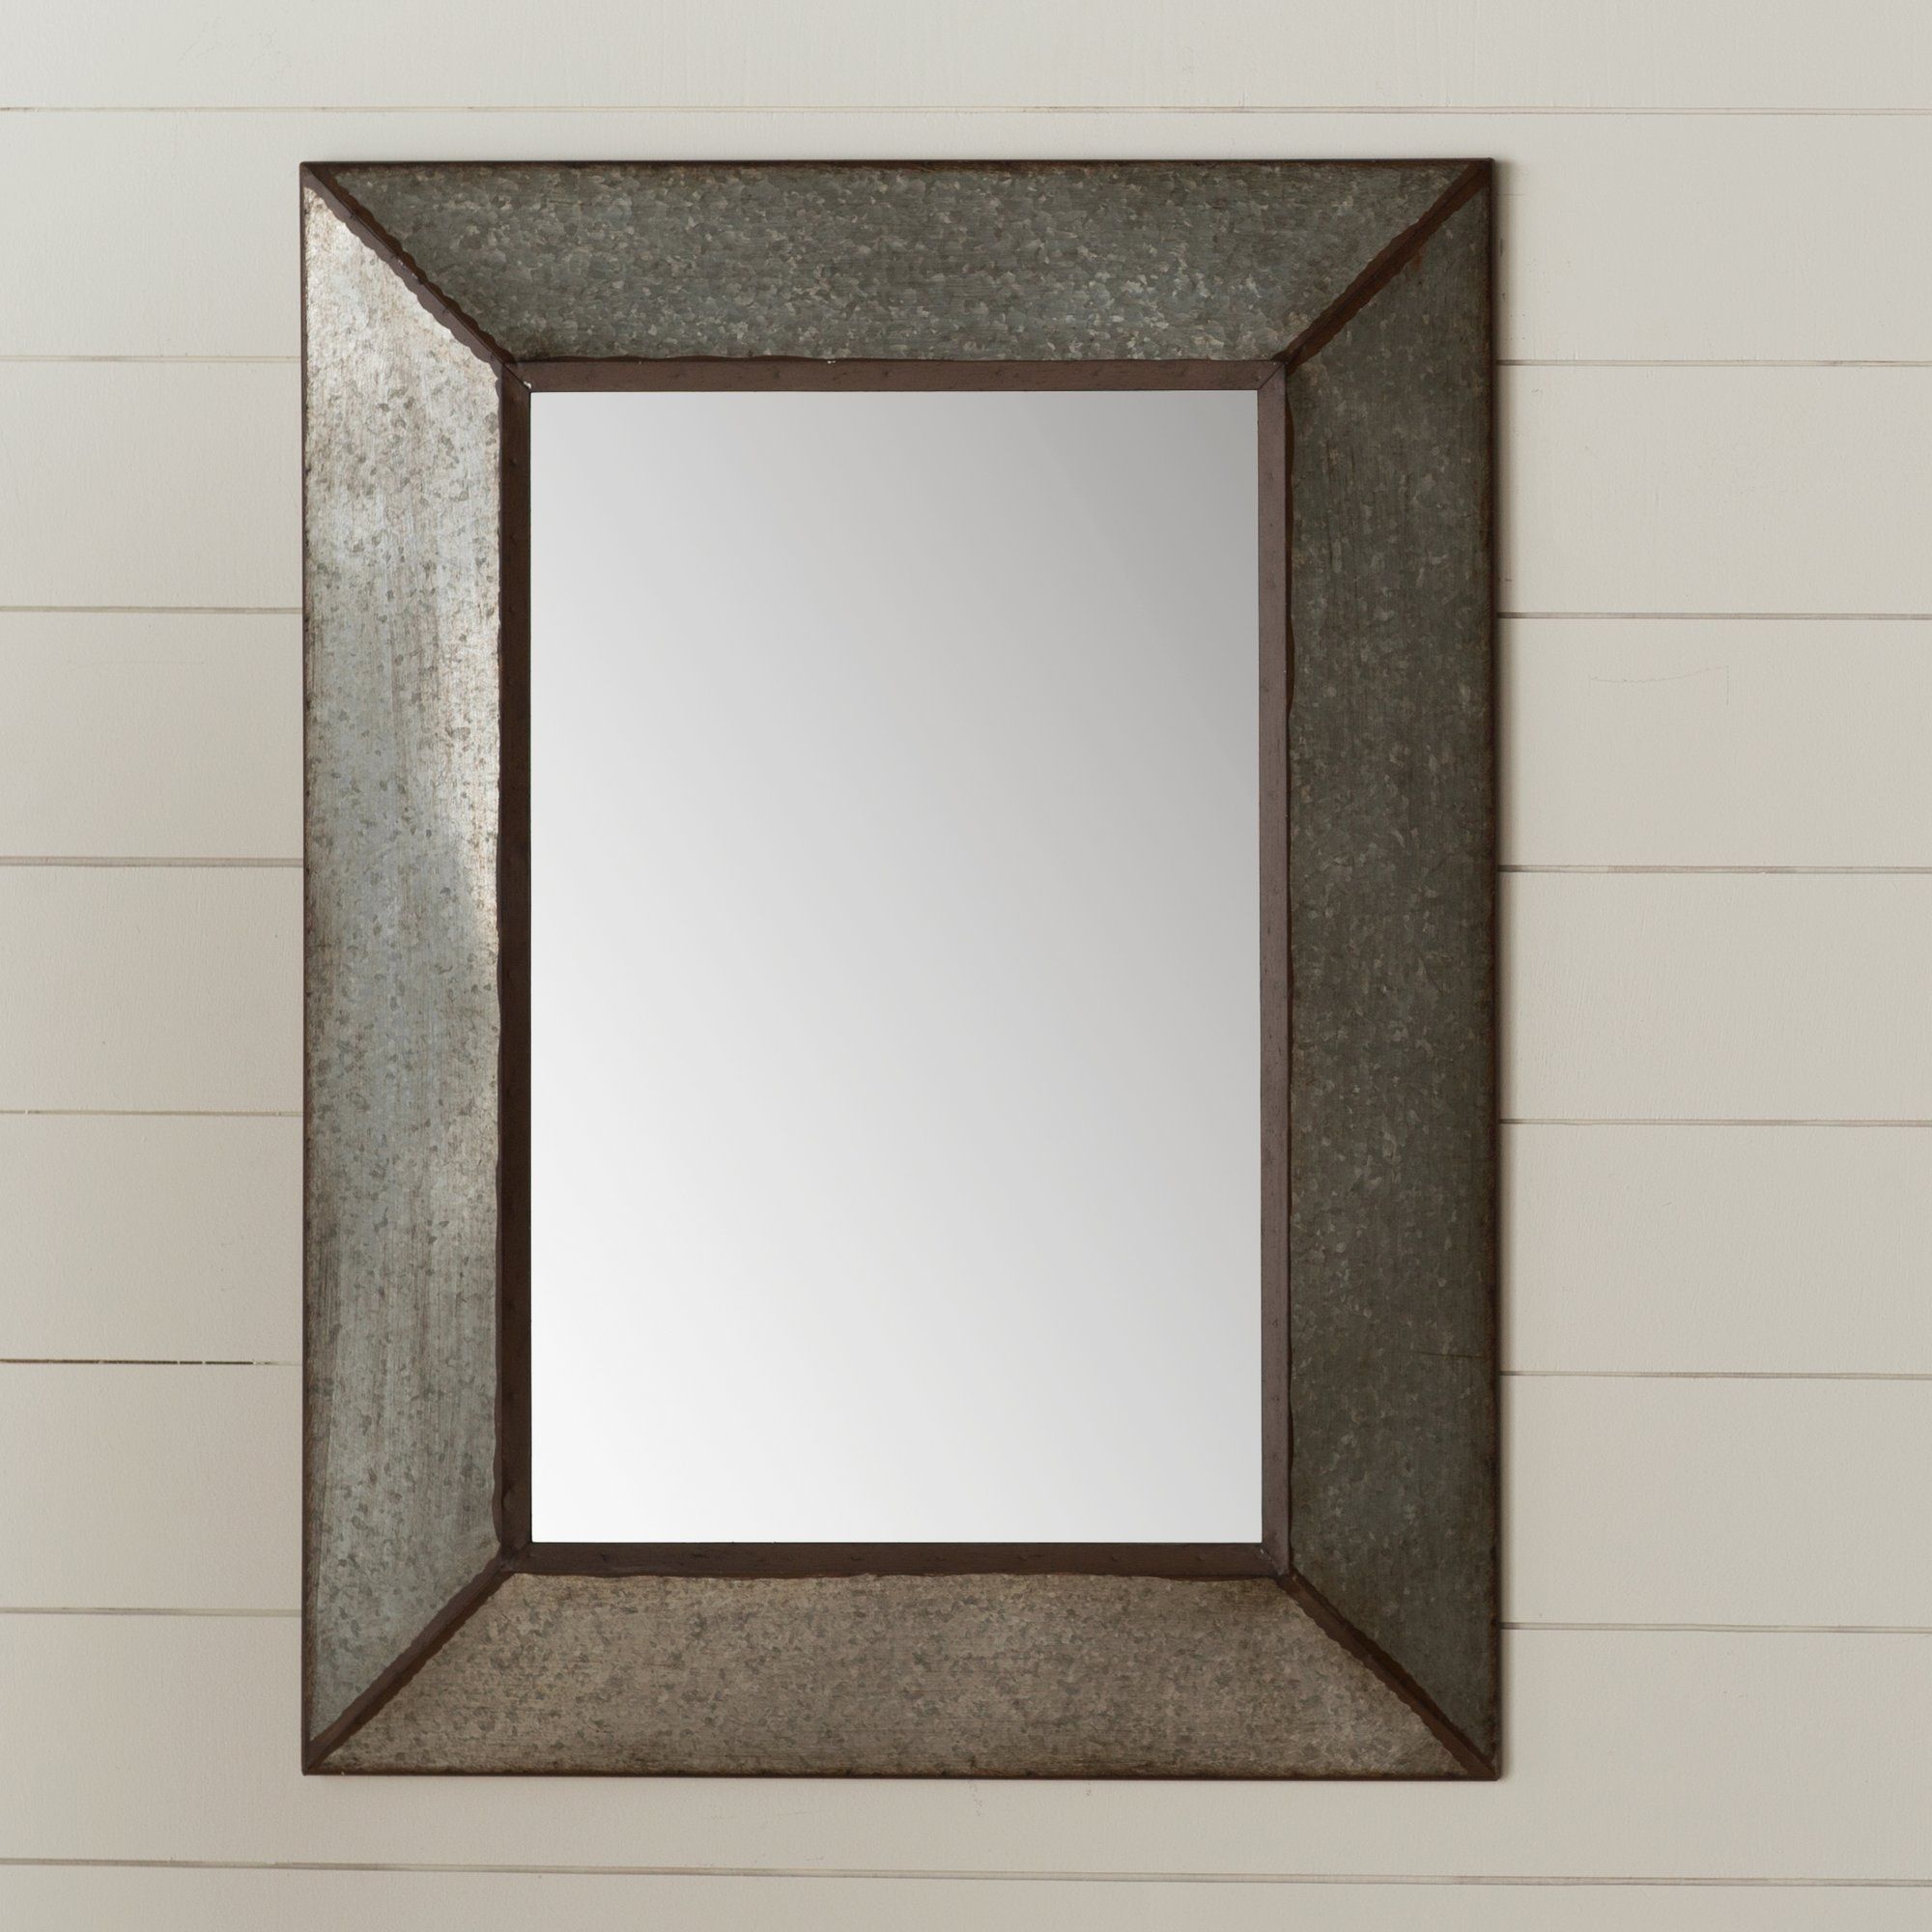 Laurel Foundry Modern Farmhouse Rectangle Antique Galvanized Metal In Mirror Modern (View 15 of 15)